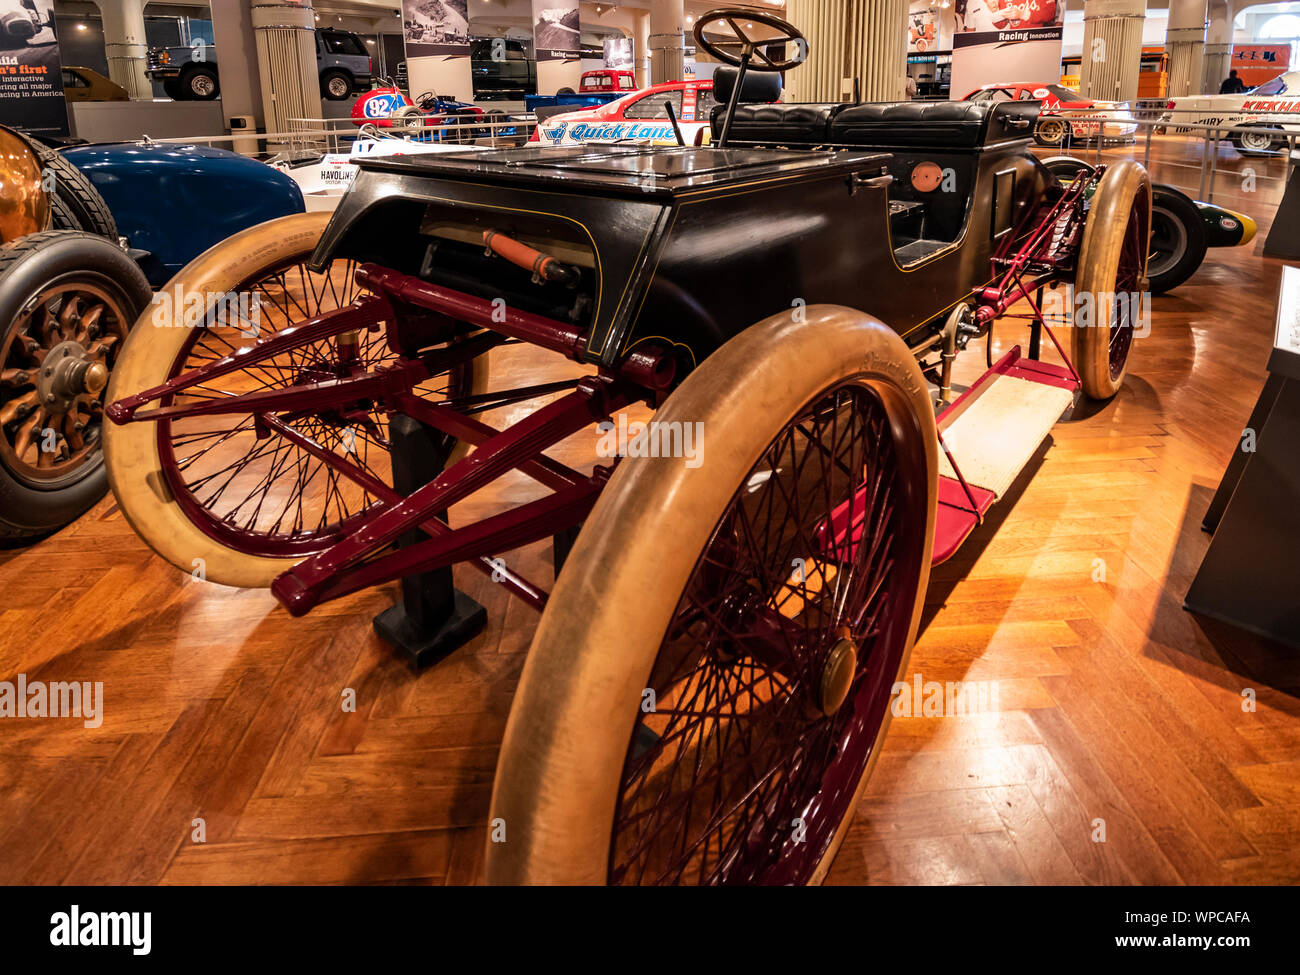 Dearborn, Mi, Usa - March 2019: The 1901 Ford sweepstakes an oval track racing car presented in the Henry Ford Museum of American Innovation. Stock Photo